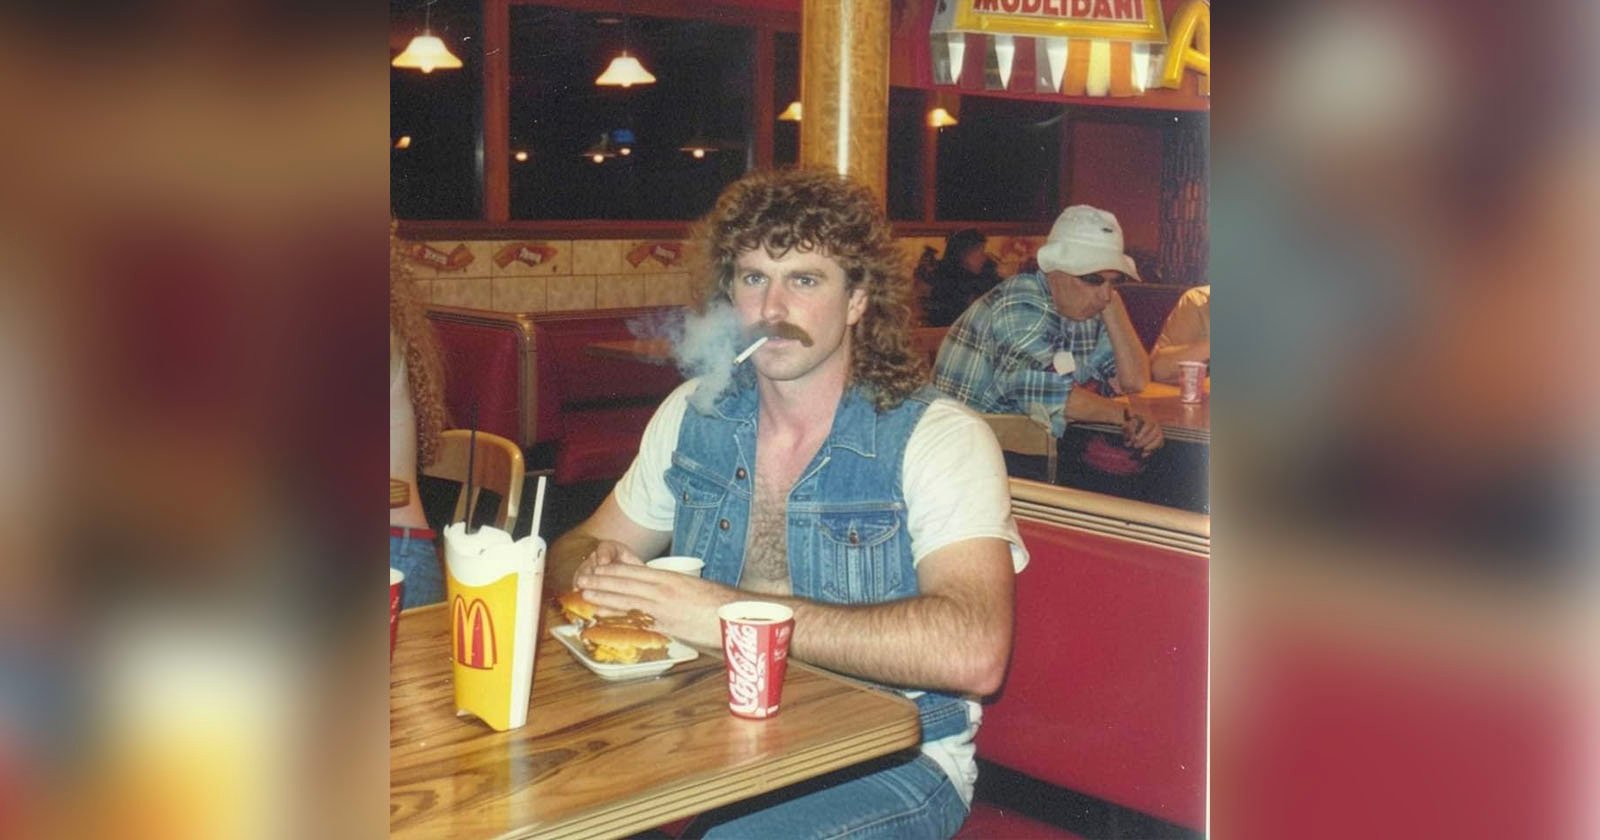 This Viral Photo Taken in 1989 of a Man Smoking in McDonalds is Not All it Seems